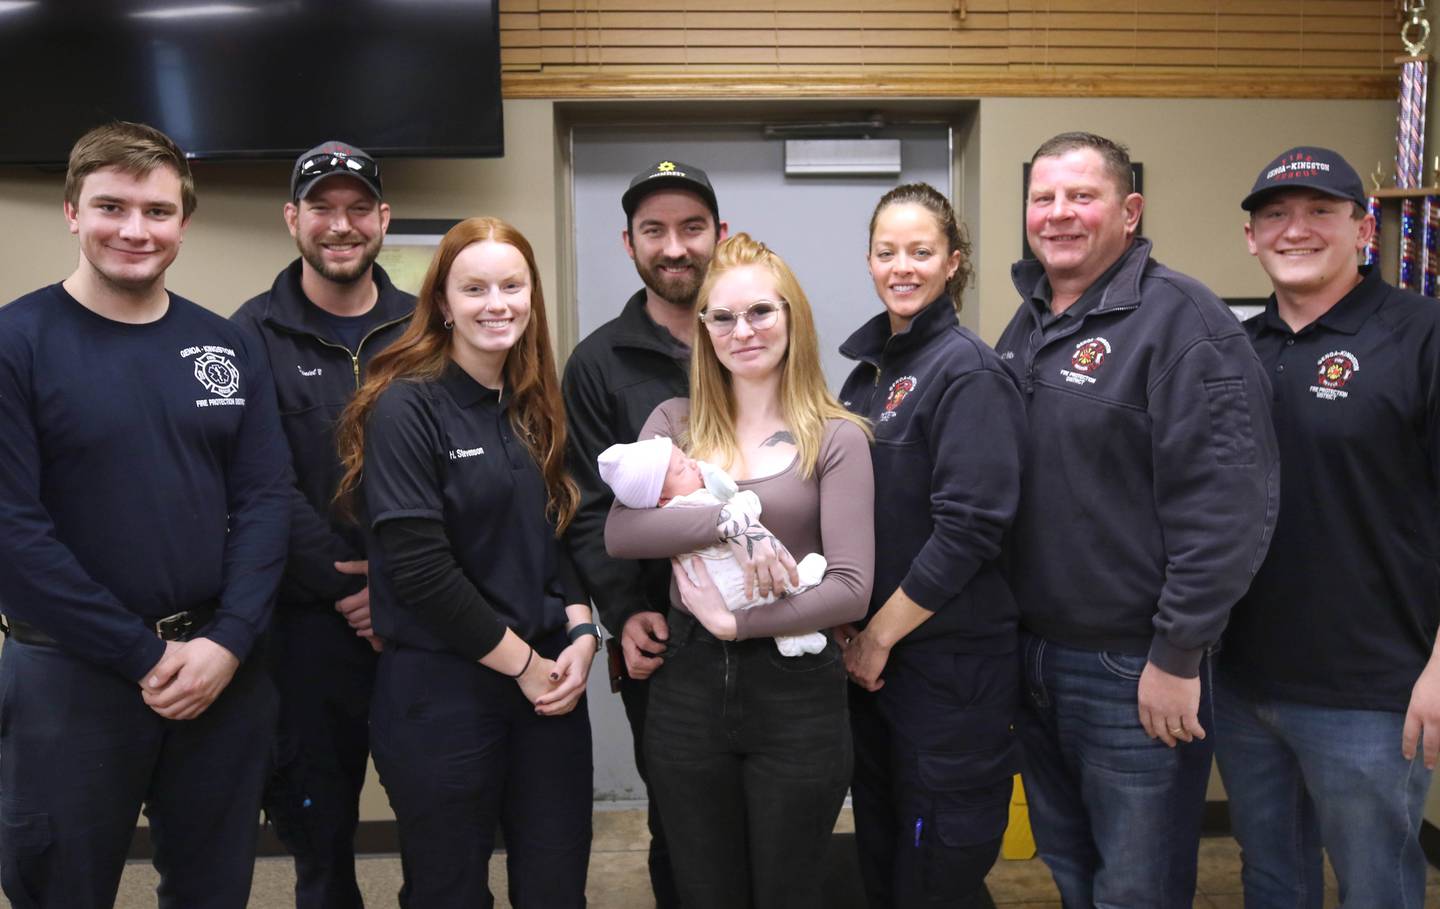 Members of the Genoa-Kingston Fire Department who had a hand in the delivery along side baby Eleanor Lee Altepeter-Knotts, and her parents Sammie Altepeter and Brodie Knotts (middle) from Kingston Thursday, Nov. 2, 2023, at the Genoa-Kingston Fire Department in Genoa. A crew from the department delivered the baby in the ambulance along the side of the road Sept. 29 when they realized they weren’t going to make it to the hospital in time.